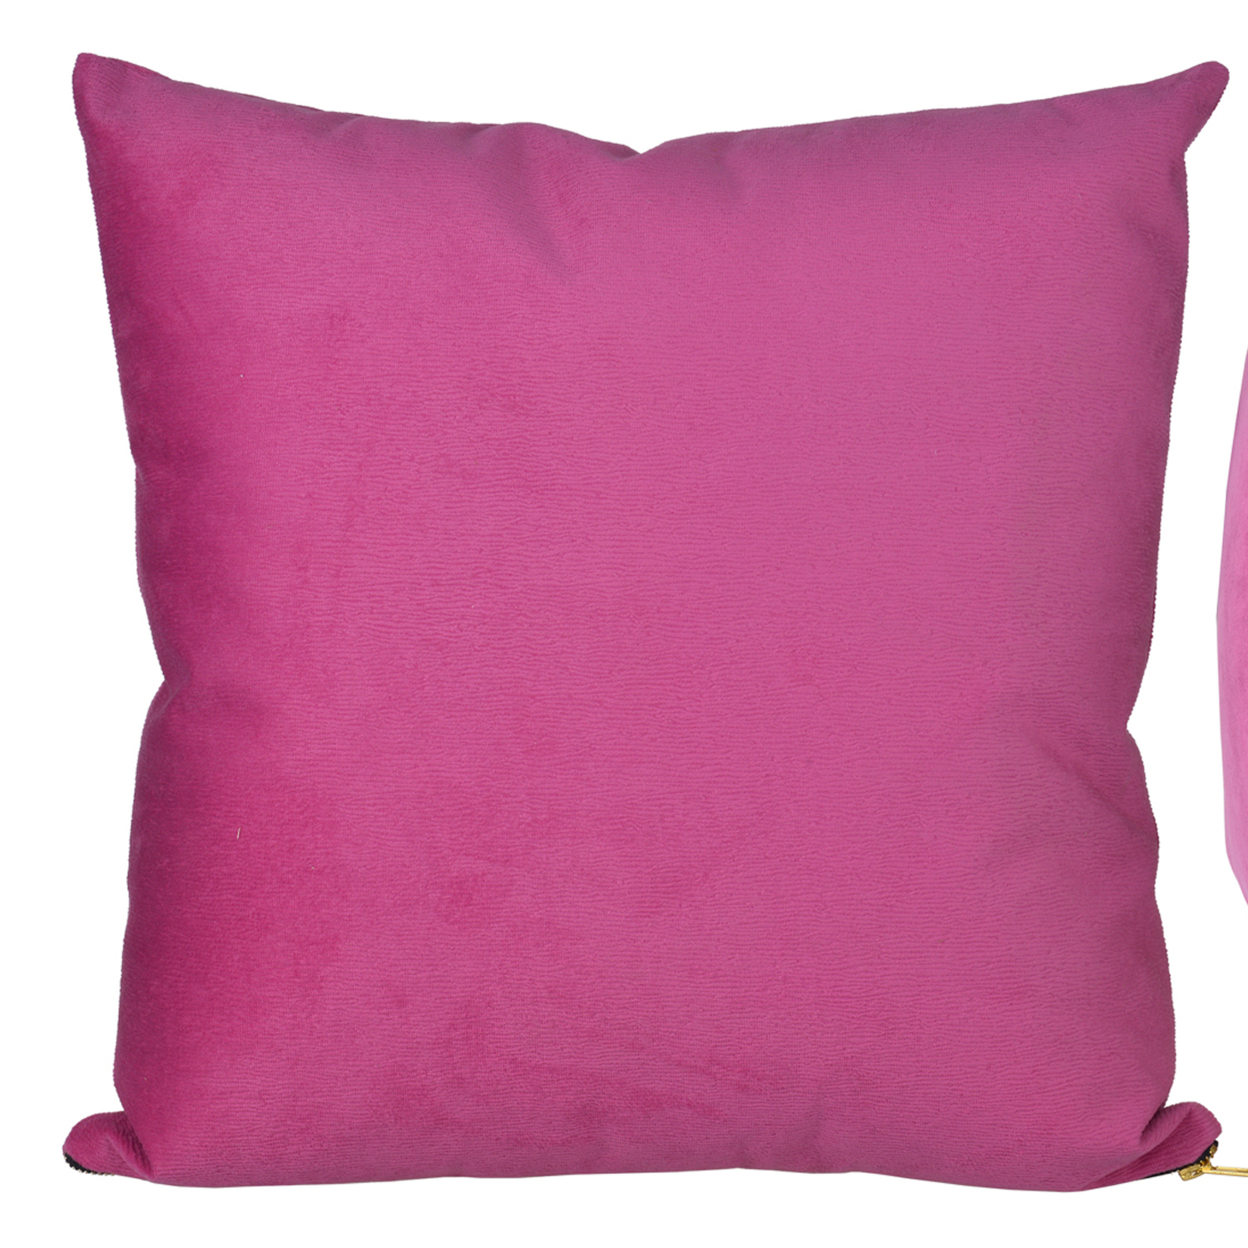 18 X 18 Inch Polyester Cover Pillow With Zipper Opening, Set Of 2, Pink- Saltoro Sherpi